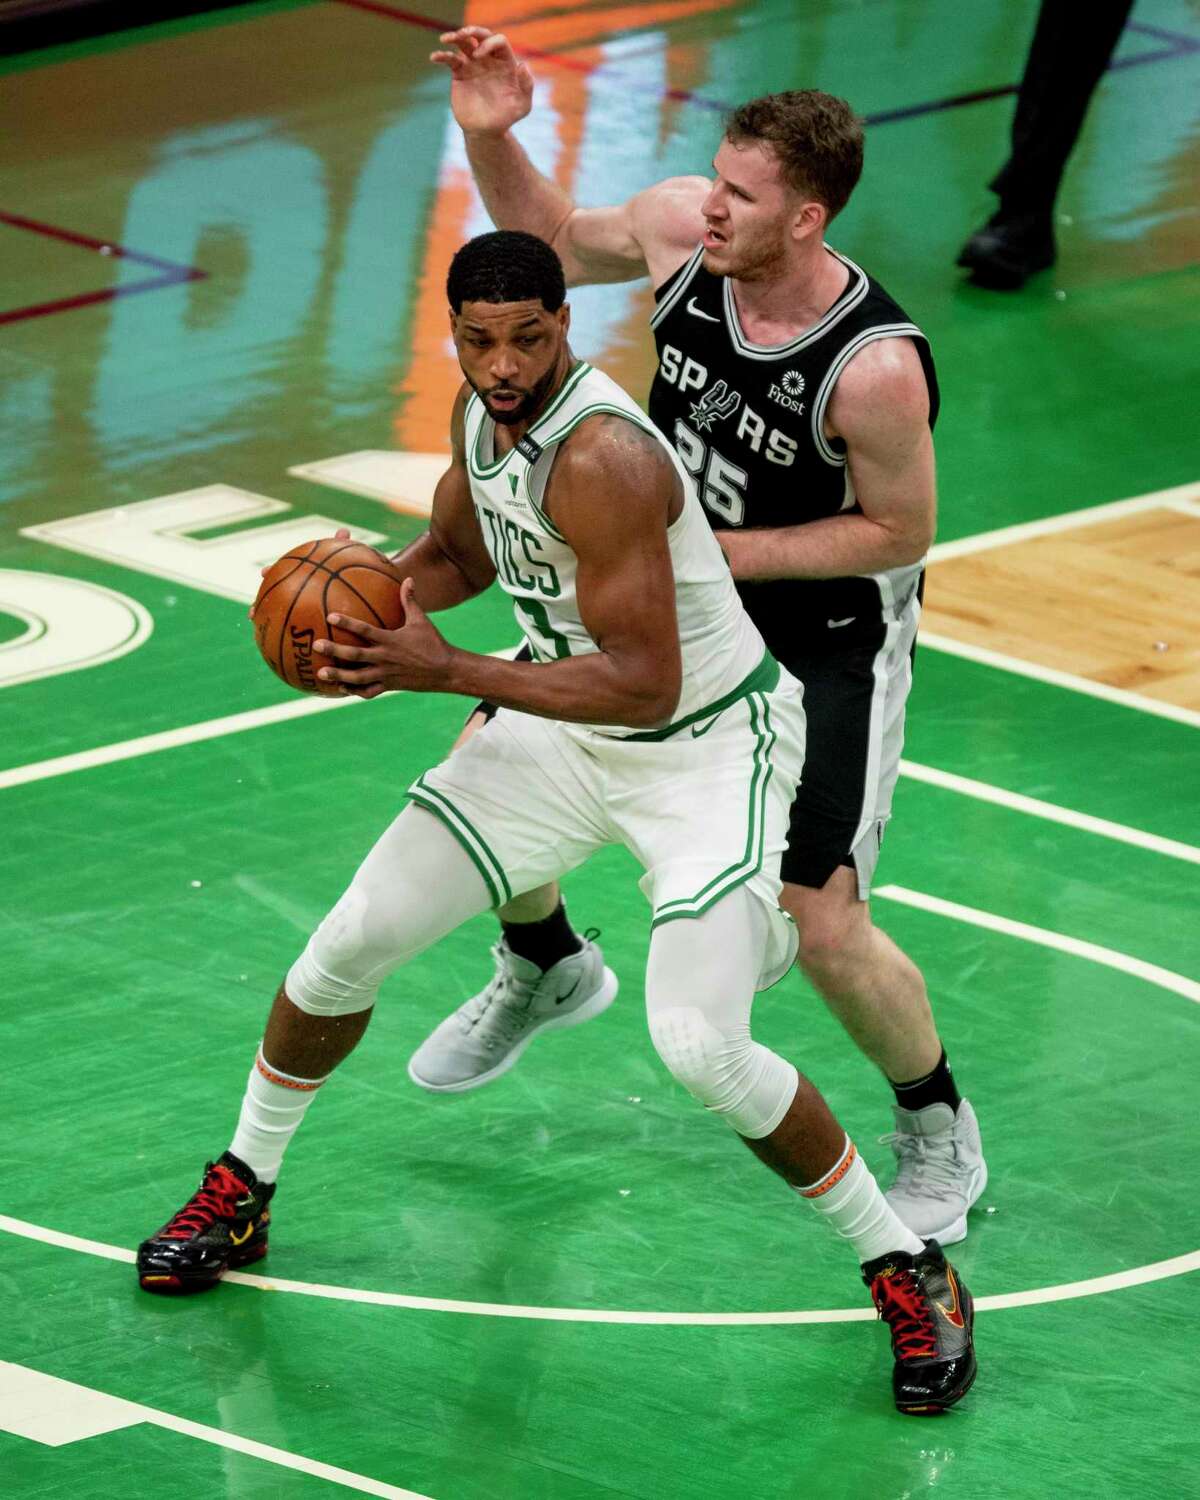 BOSTON, MASSACHUSETTS - APRIL 30: Tristan Thompson #13 of the Boston Celtics and Jakob Poeltl #25 of the San Antonio Spurs battle for a rebound at TD Garden on April 30, 2021 in Boston, Massachusetts. NOTE TO USER: User expressly acknowledges and agrees that, by downloading and or using this photograph, User is consenting to the terms and conditions of the Getty Images License Agreement. (Photo by Maddie Malhotra/Getty Images)